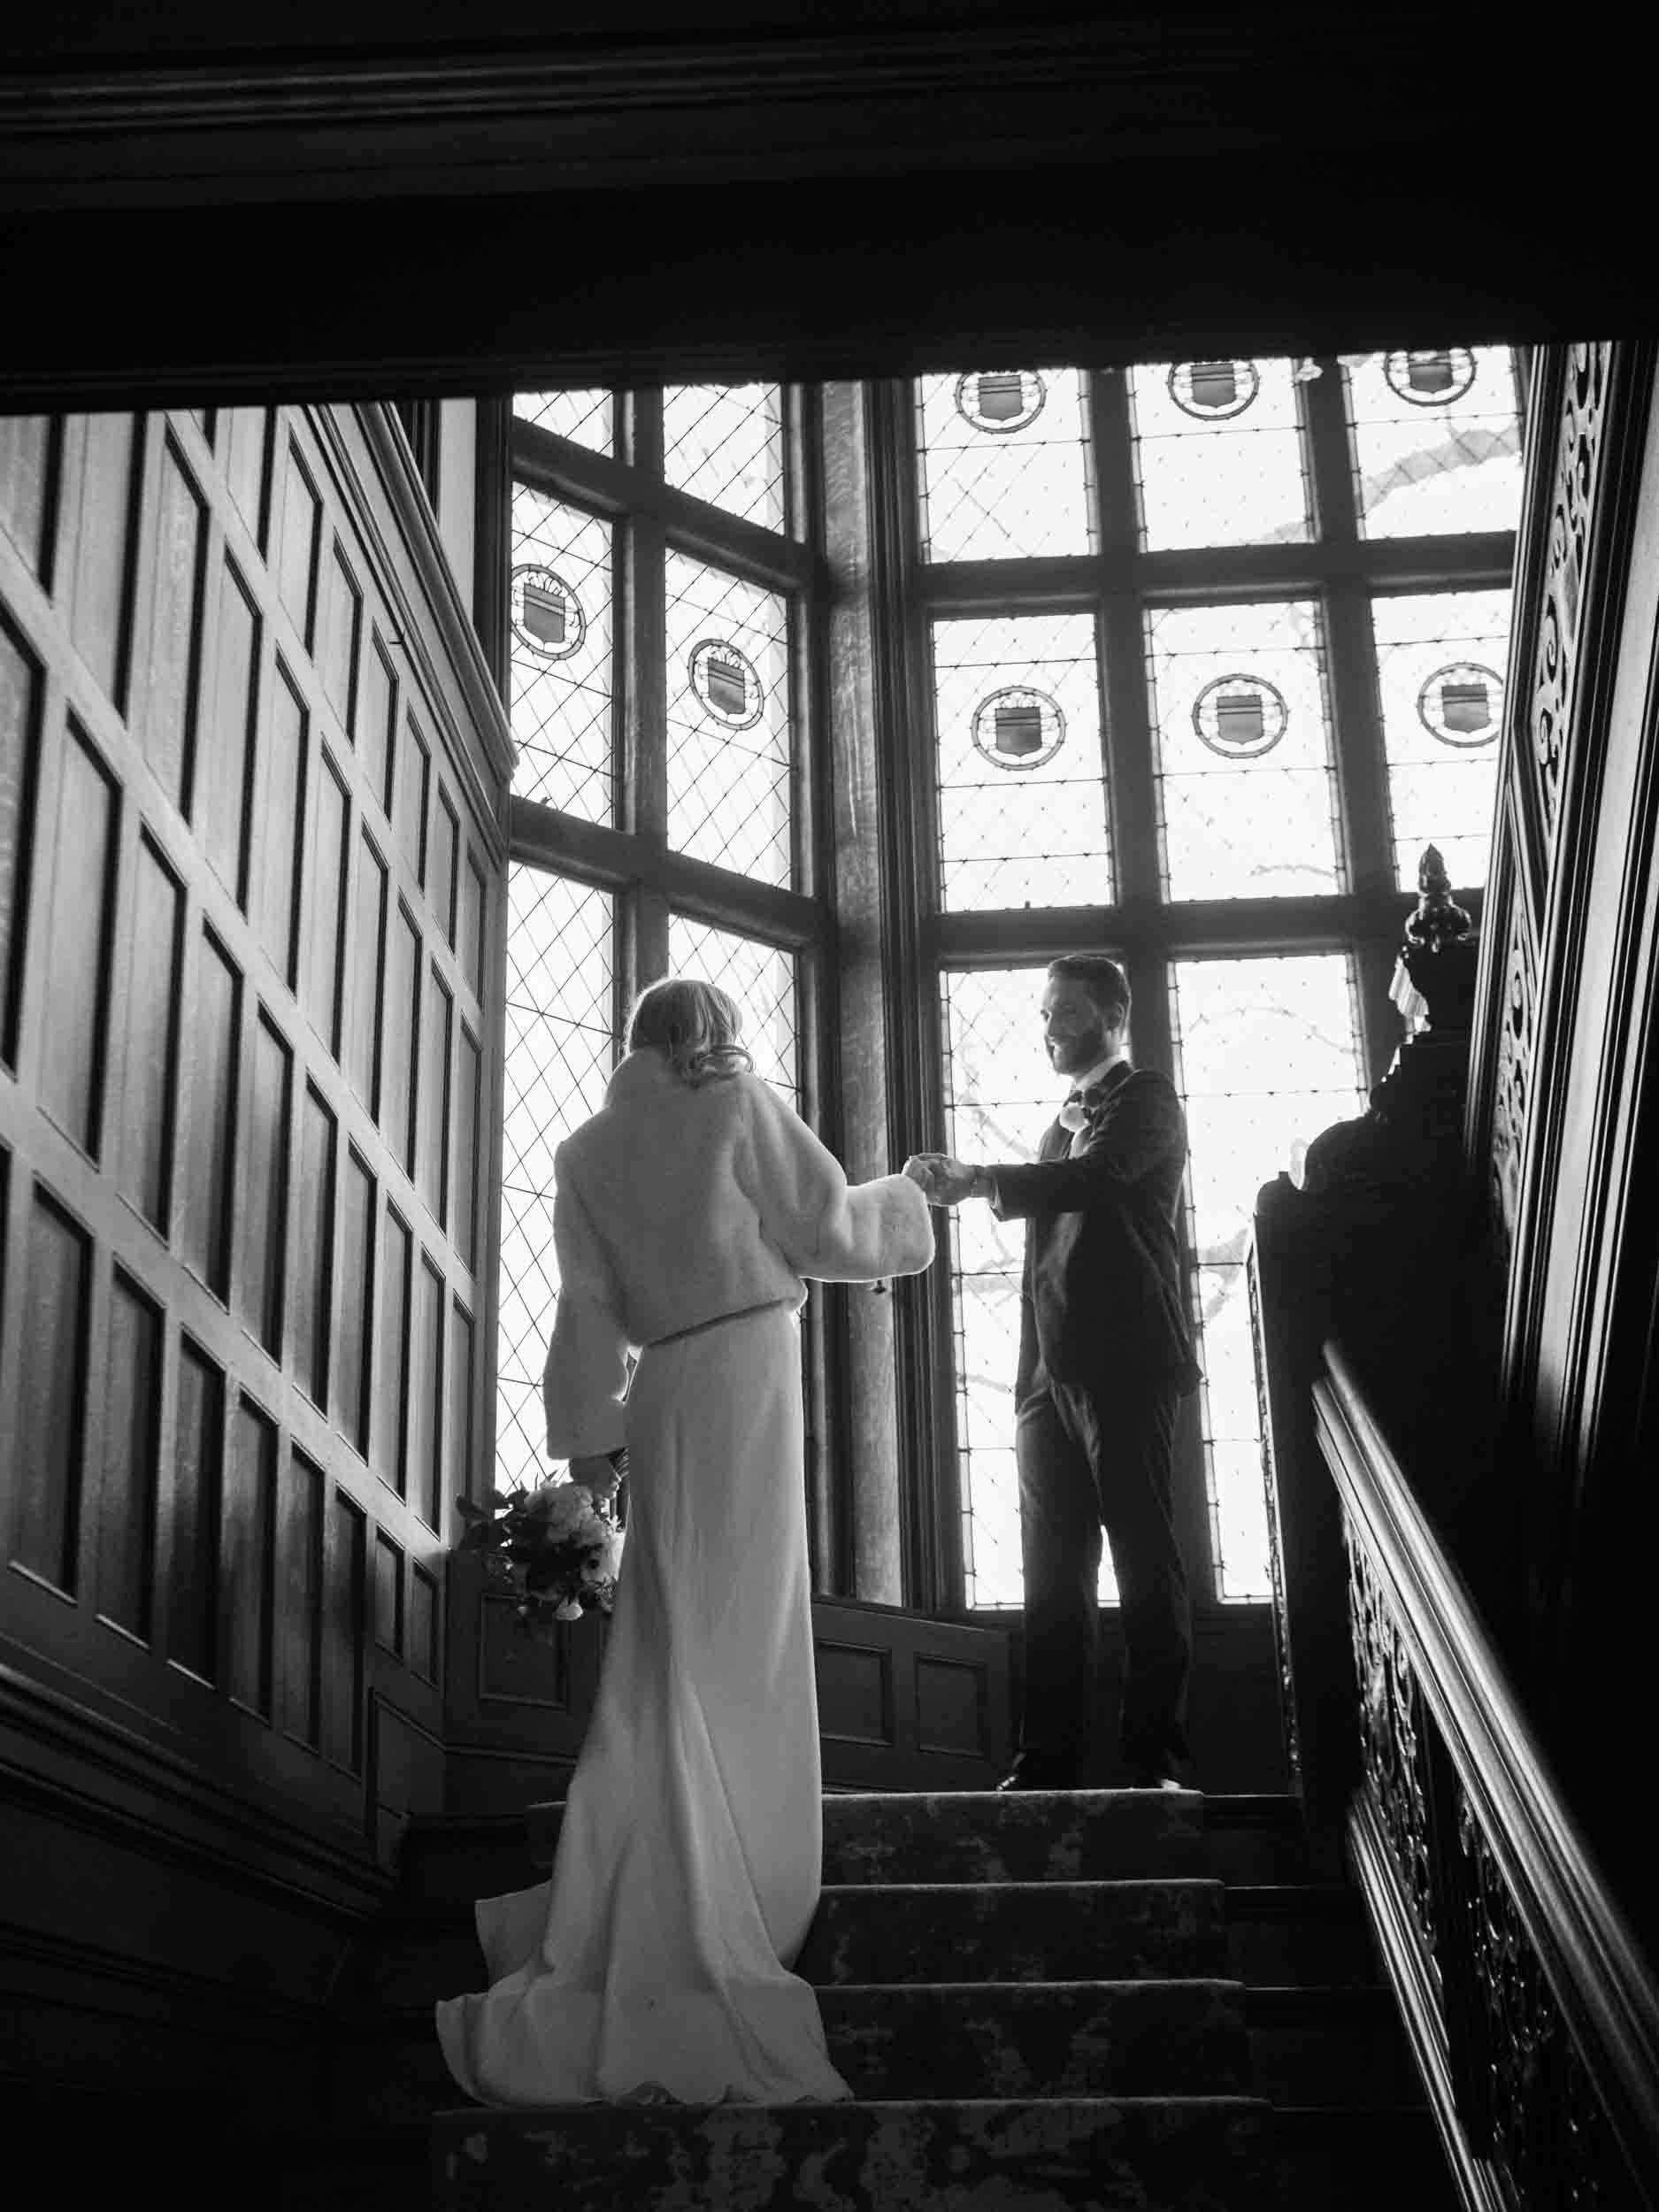 Groom leading bride up the stairs at gilded-age manor